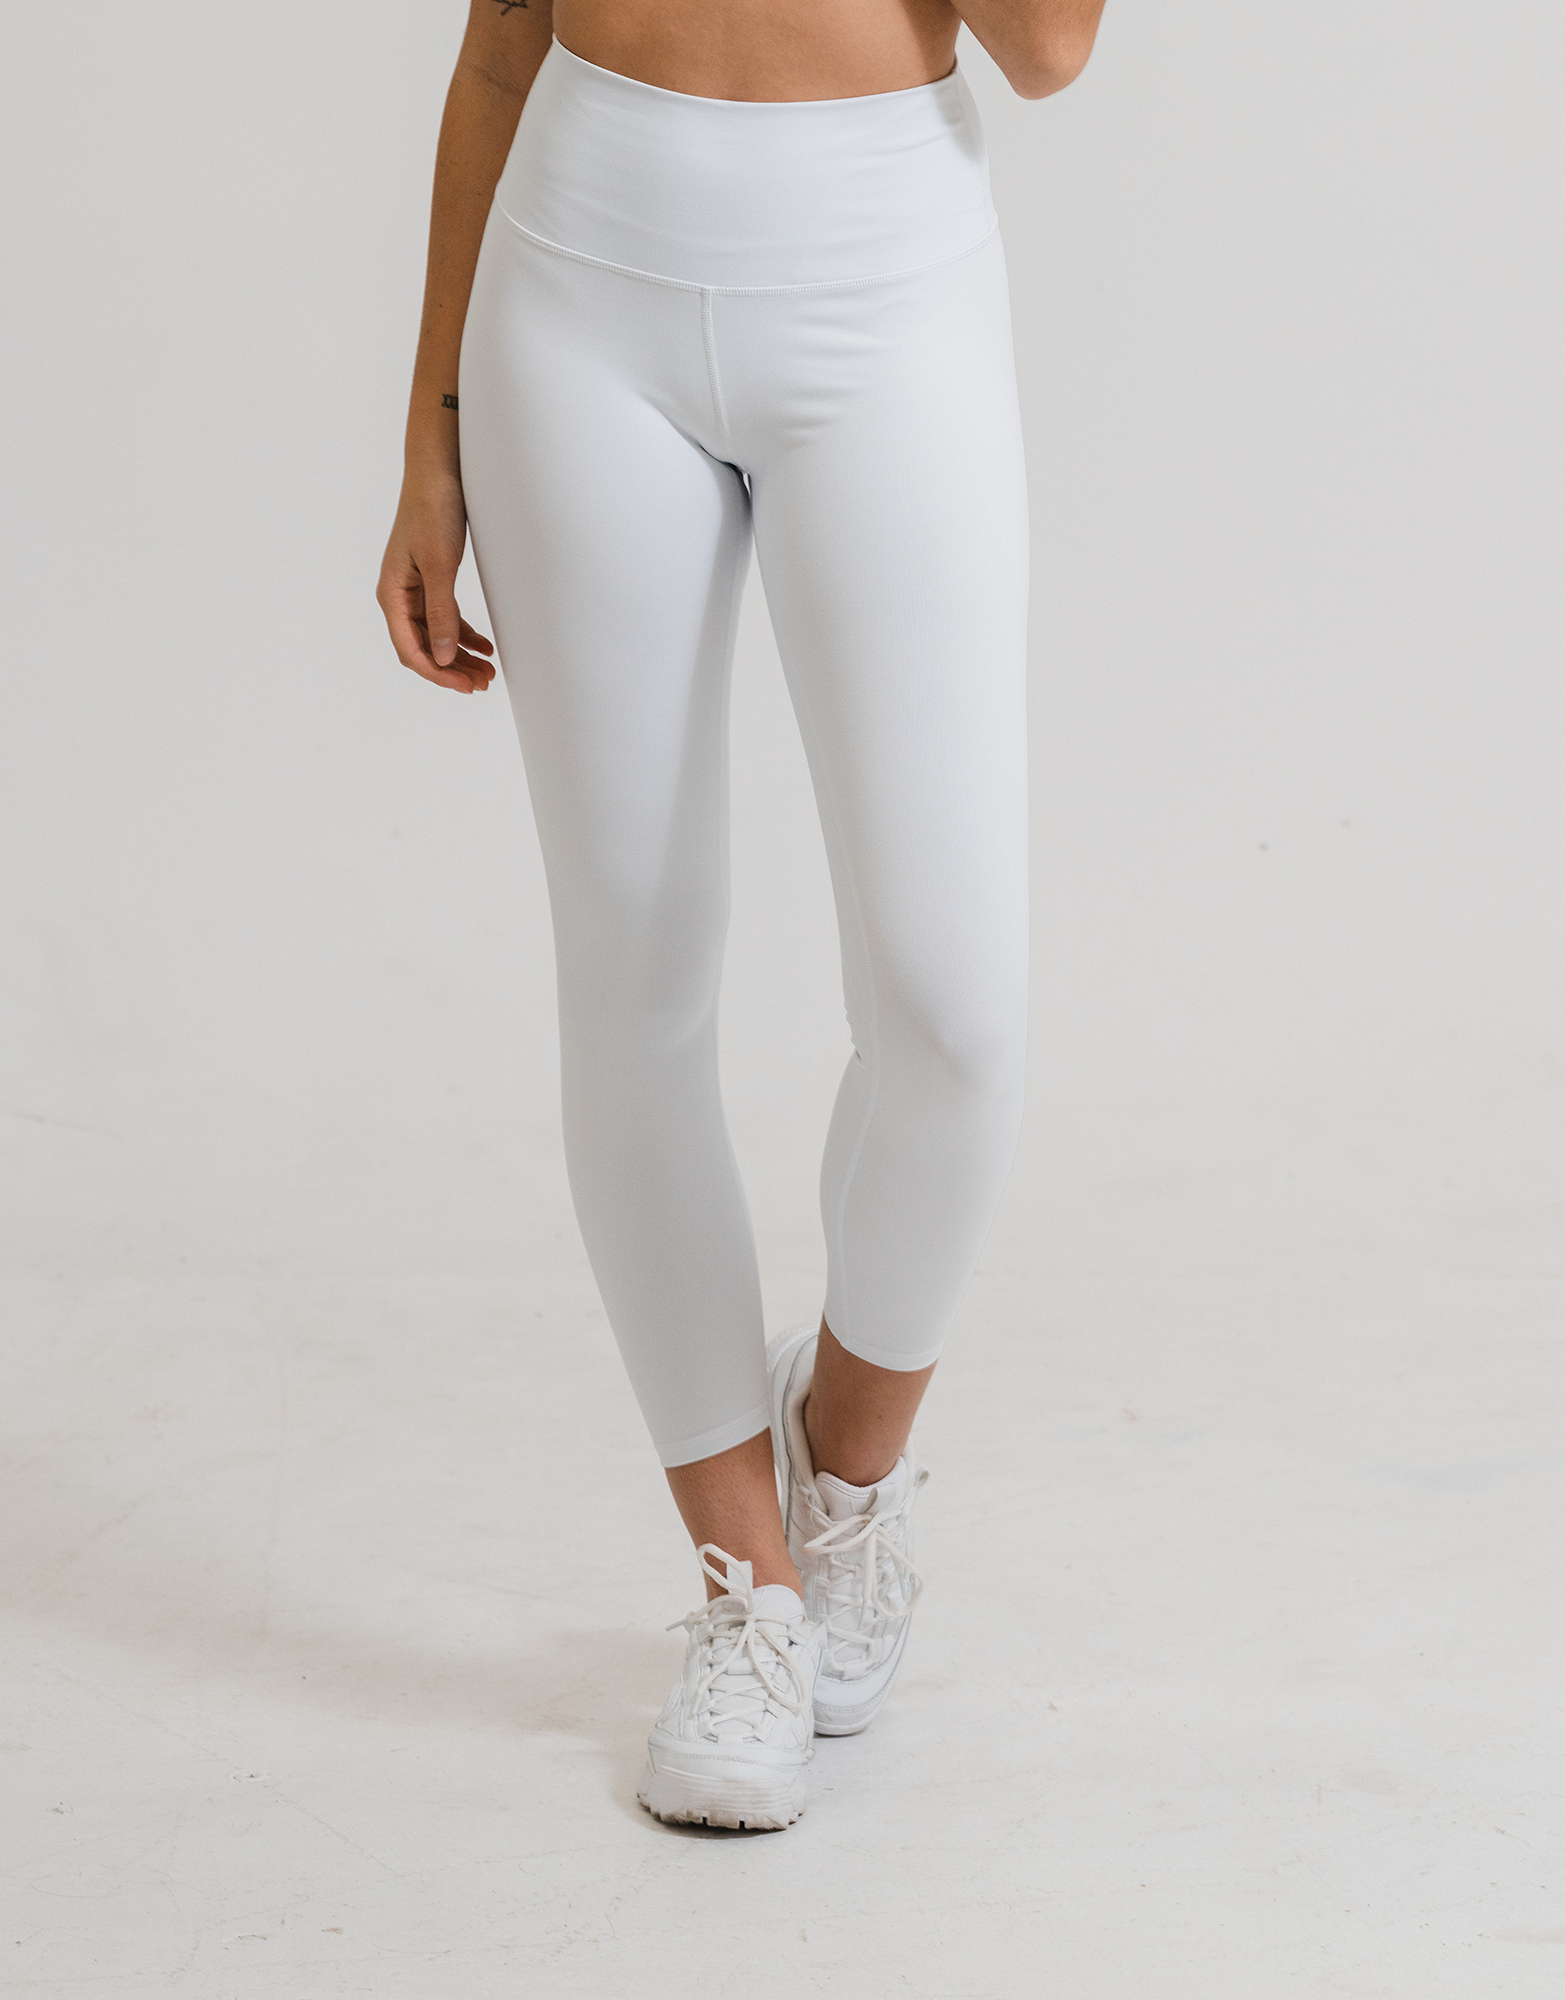 Only Play Tall Sugar Gilian Training leggings in White, only play